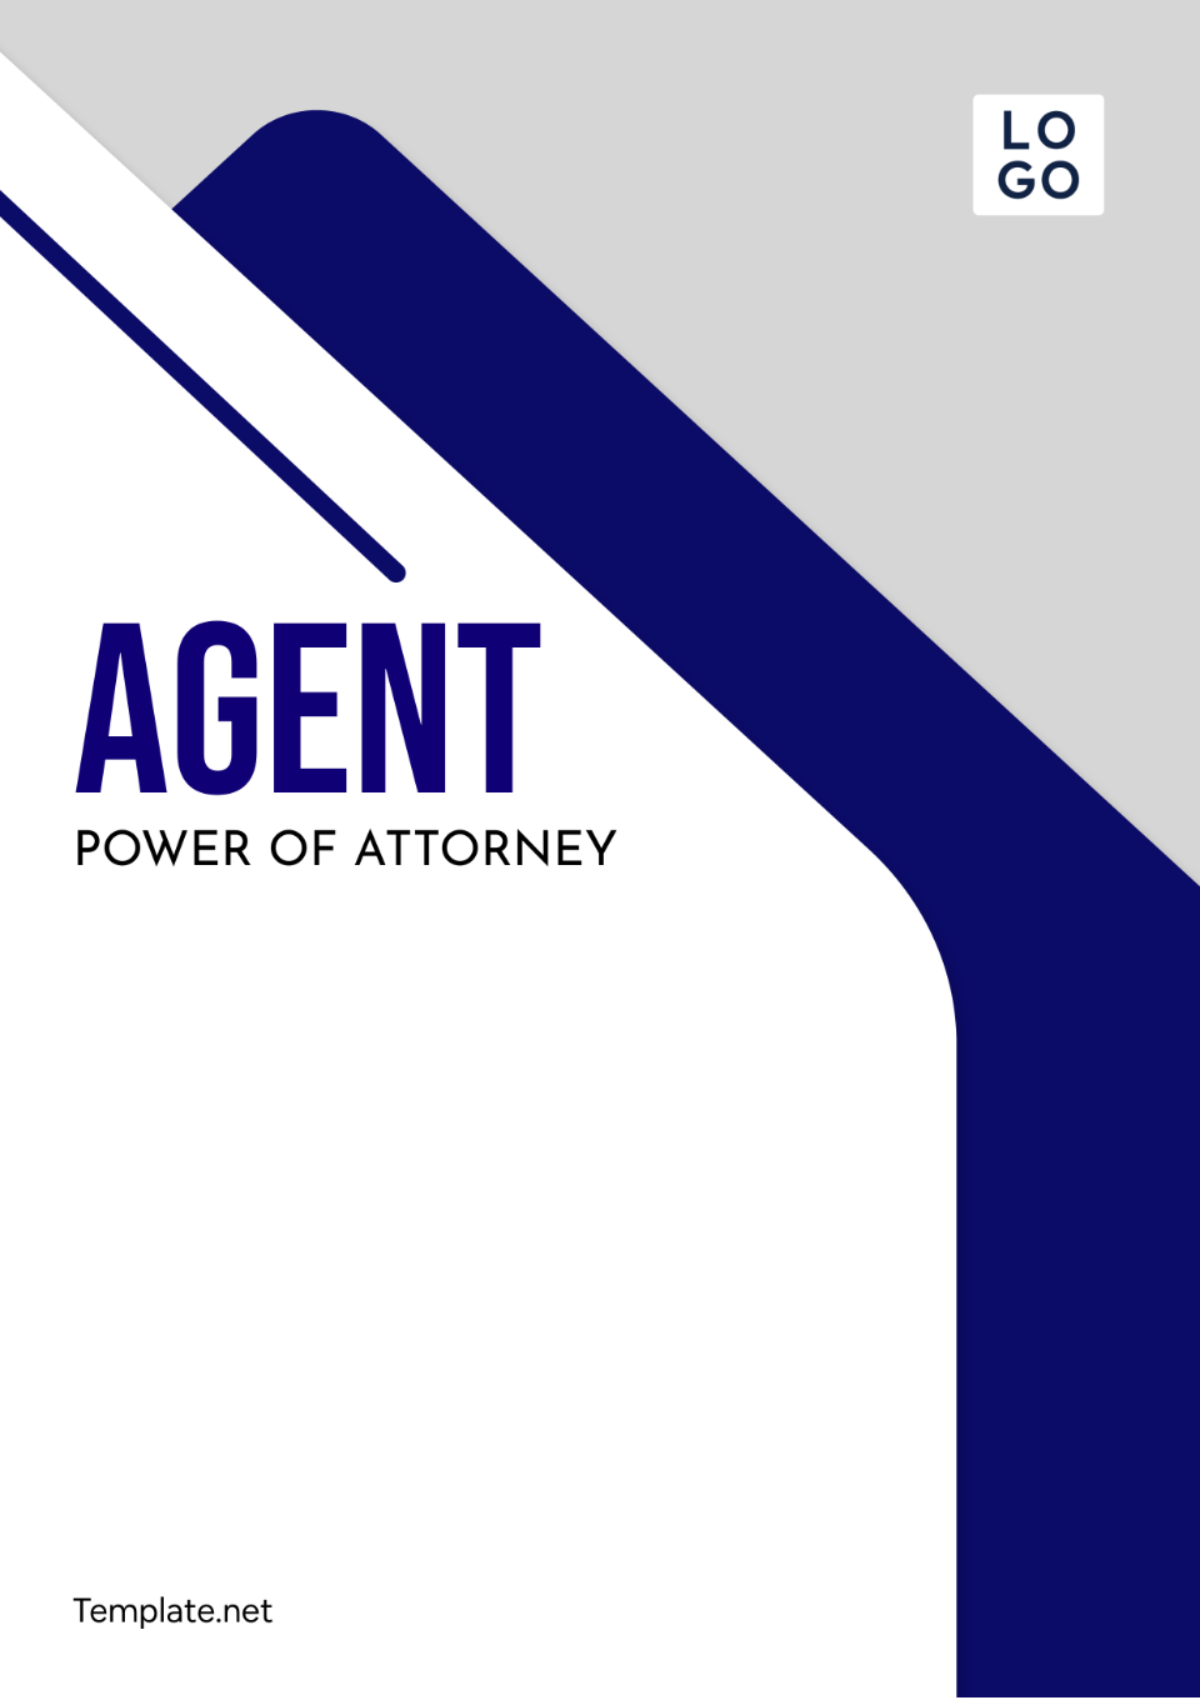 Agent Power of Attorney Template